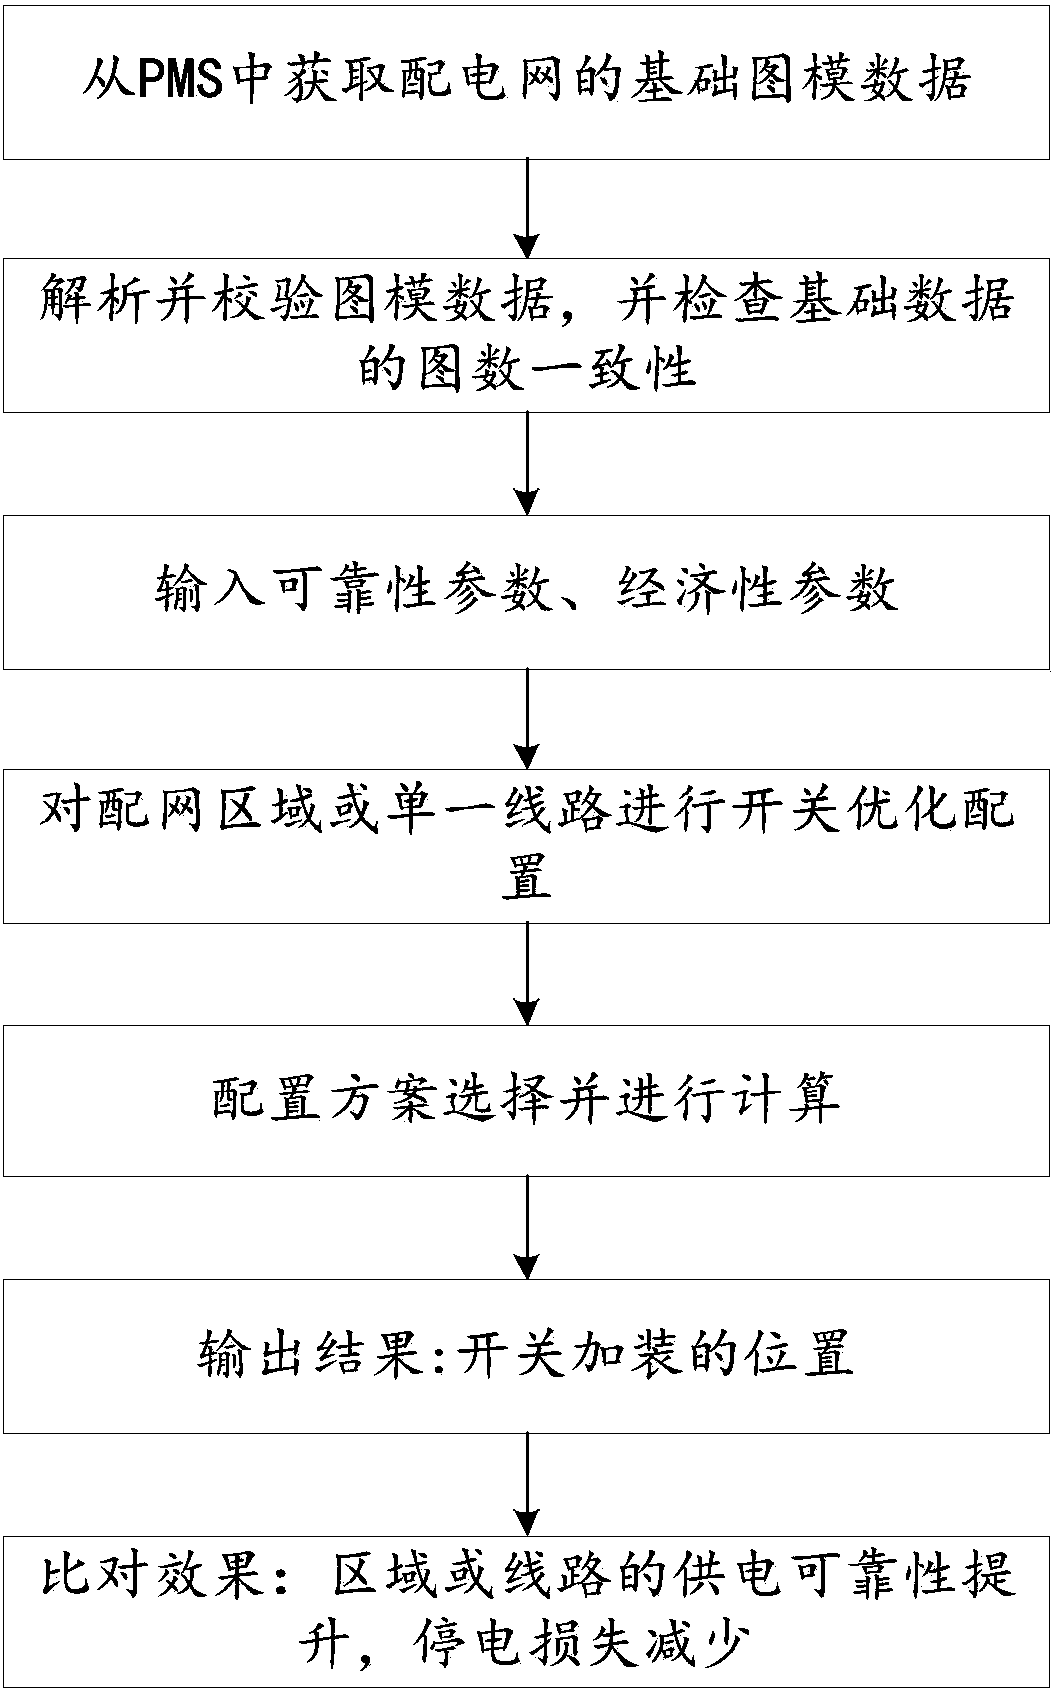 Reliability improvement-based power distribution network switch planning method